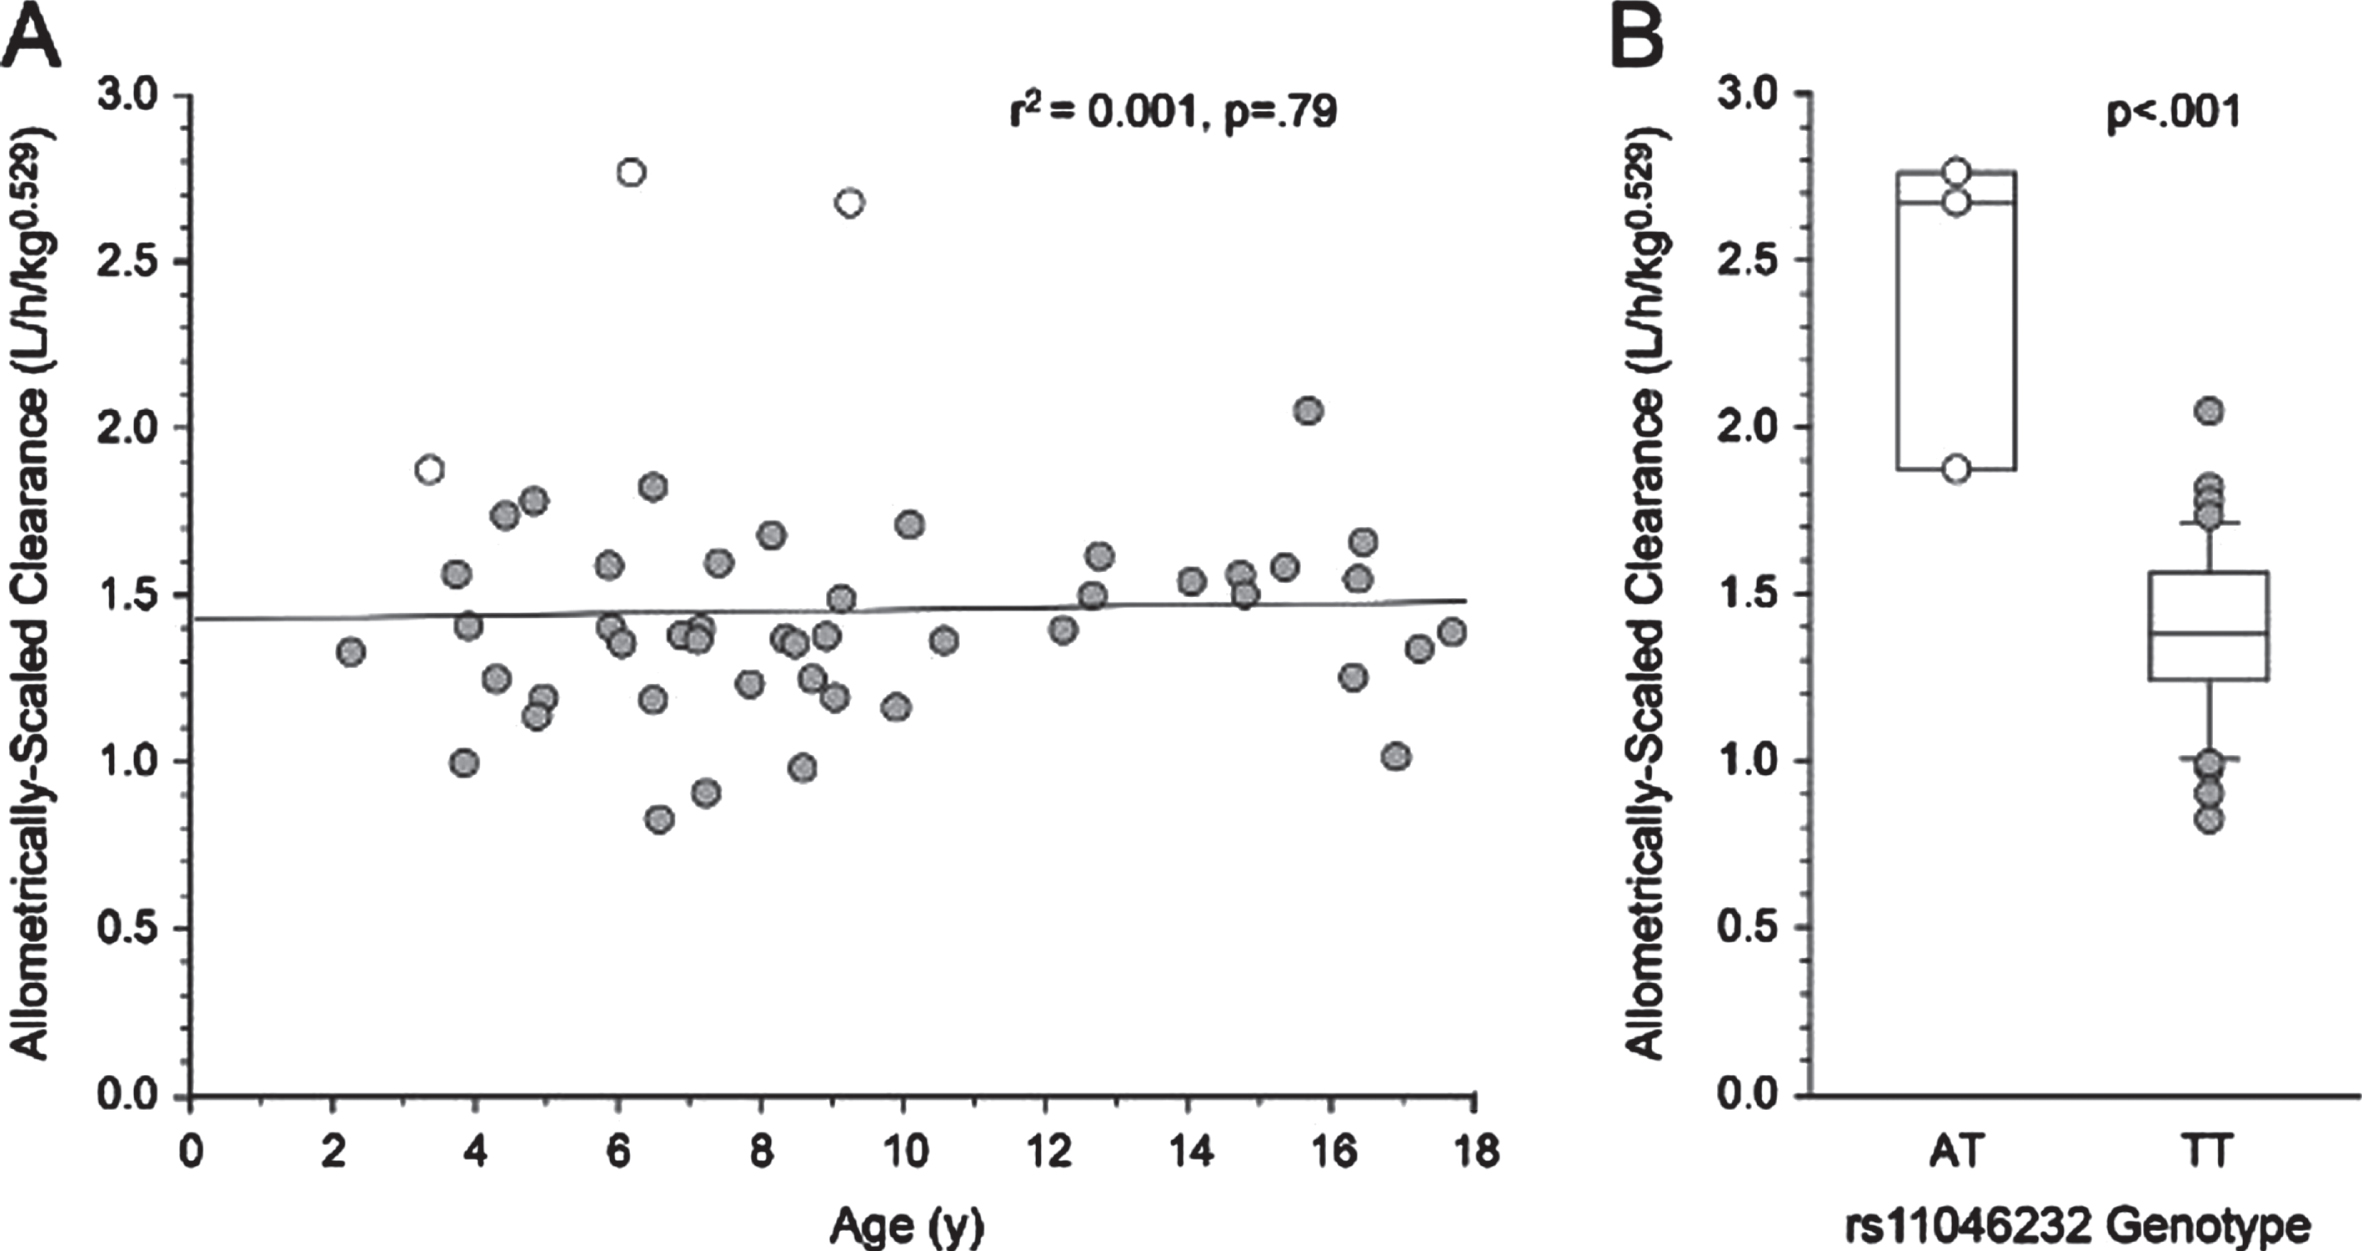 Allometric scaling to approximate organ size comparing the wild-type (grey dots) to the heterogenous (white dots) patients with cerebral palsy. This figure is reproduced with permission from the author per Elsevier’s retained author rights [17].